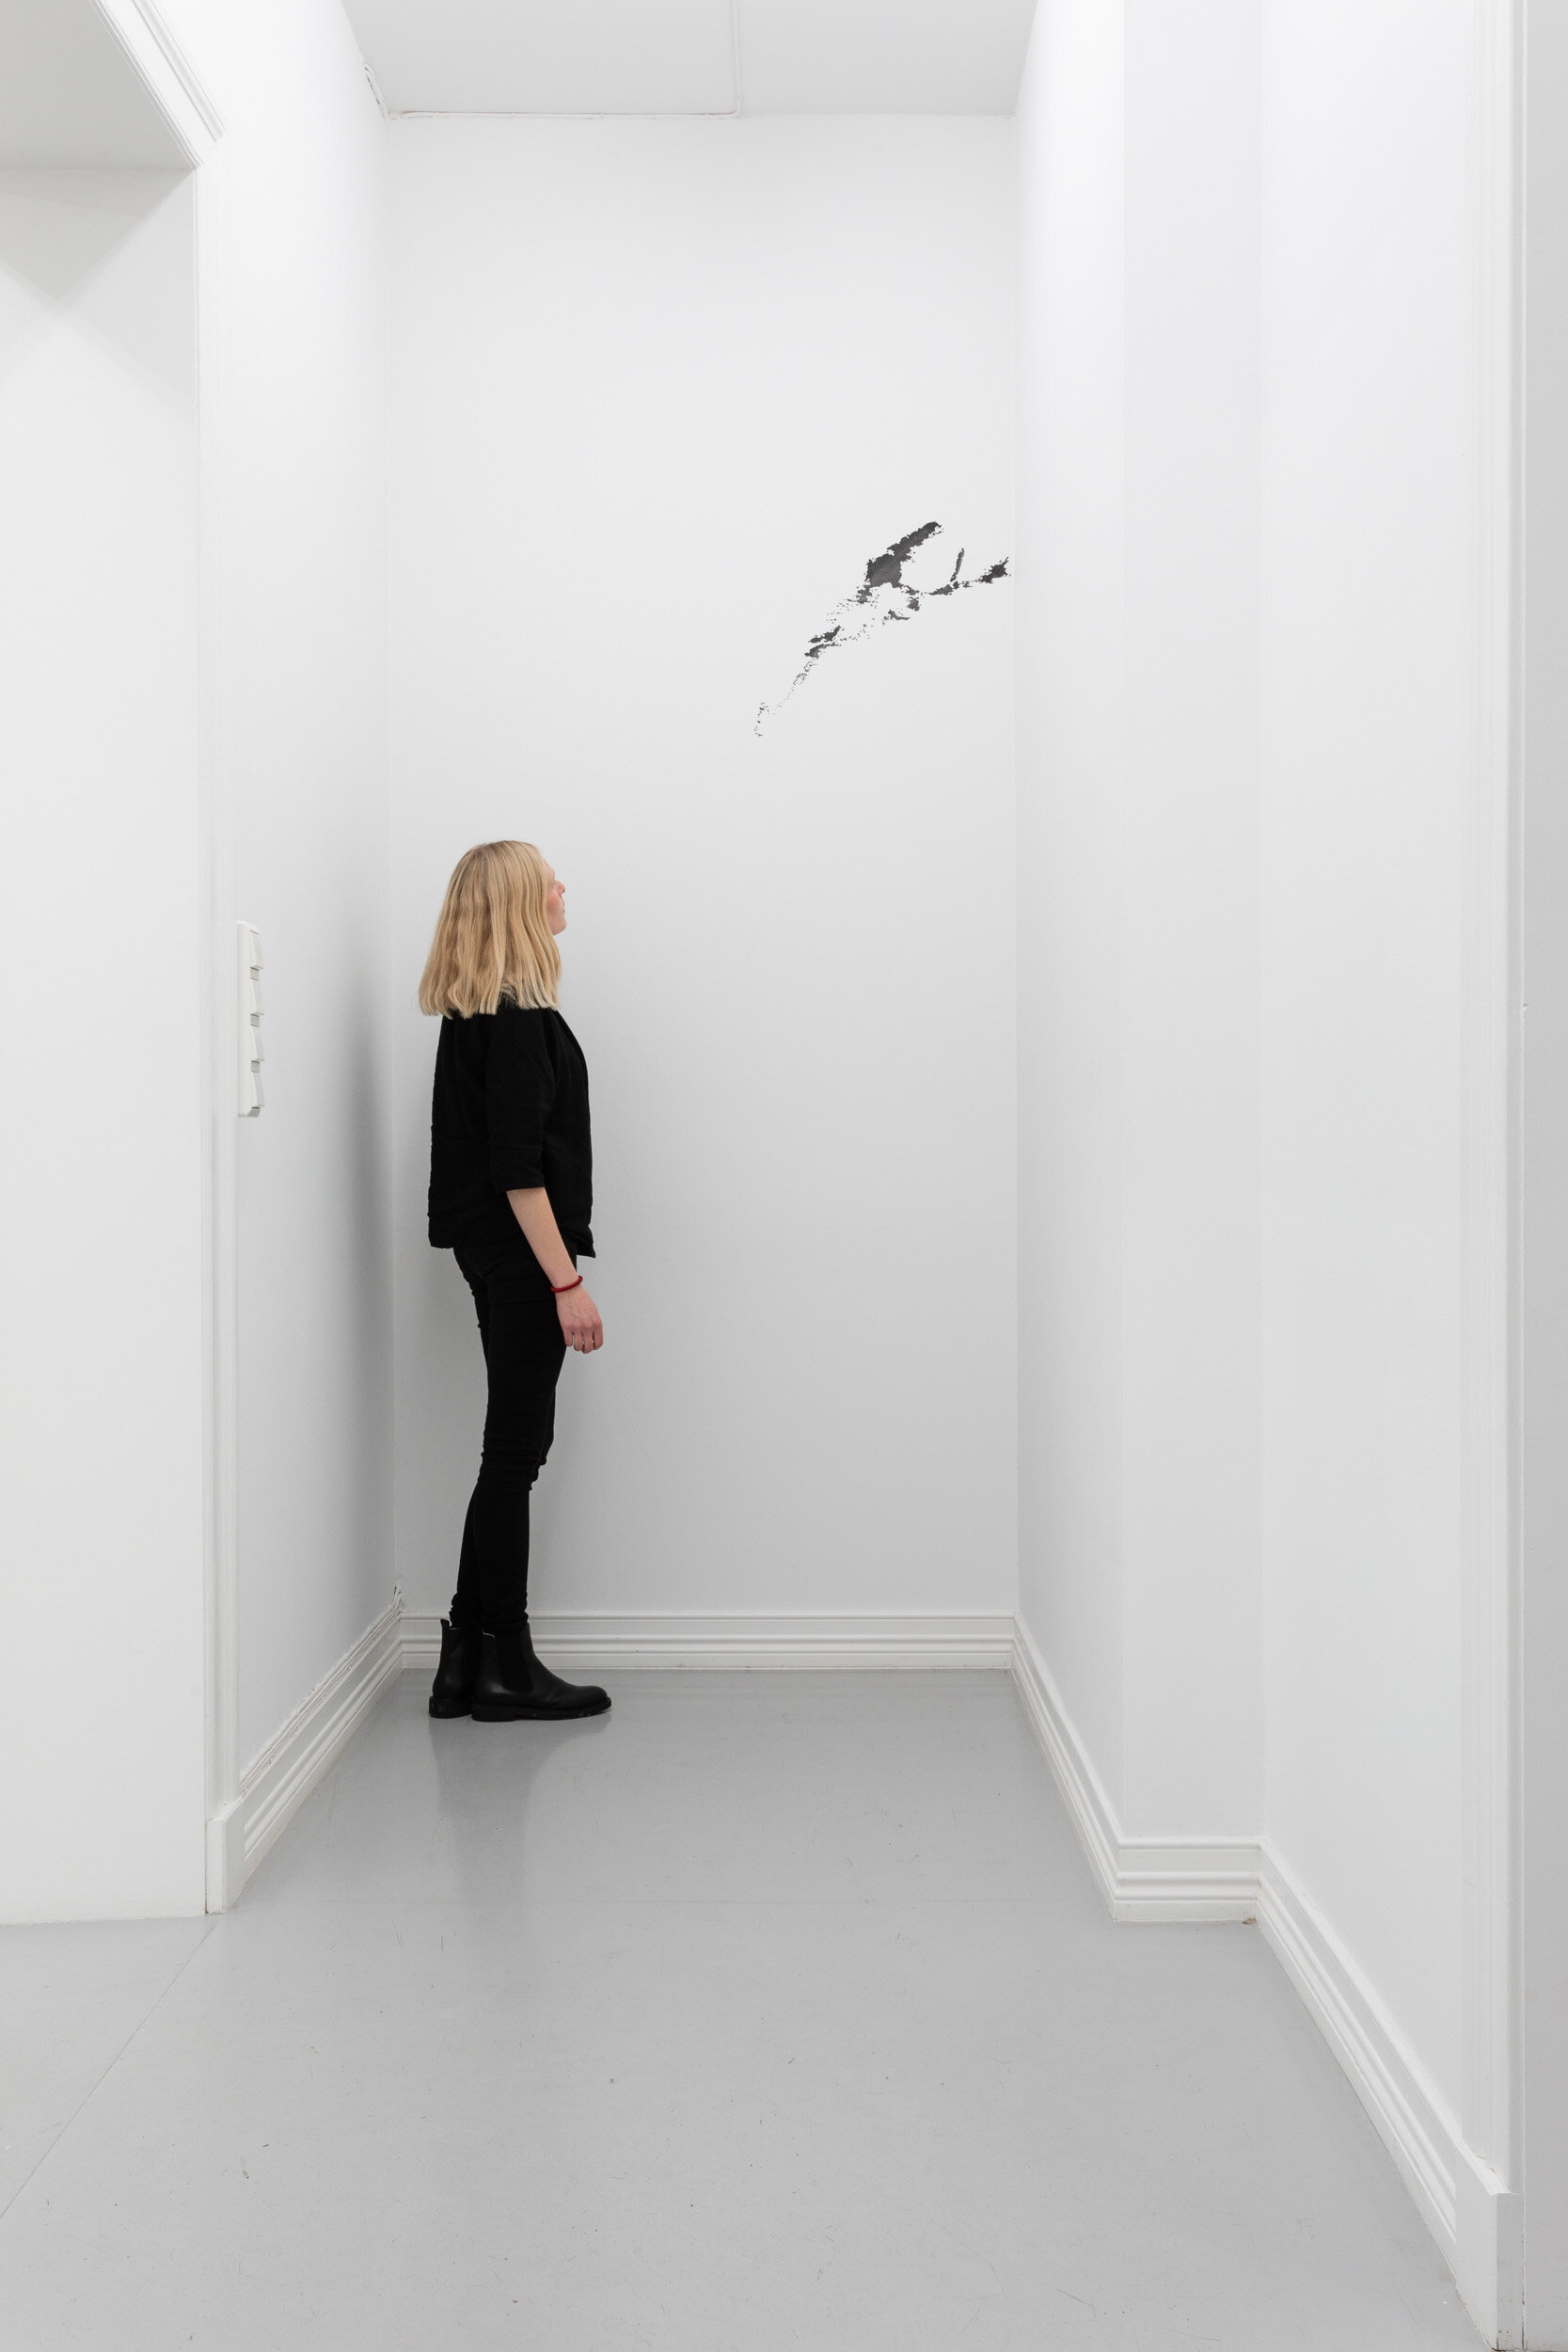  Wall Drawing for Galleri Riis I, 2019. Crayon on wall, H 324 x W 135 cm. Unique. Installation view Jan Groth ‘Signs and Figures’, Galleri Riis, Oslo 2019. Photo: Adrian Bugge 